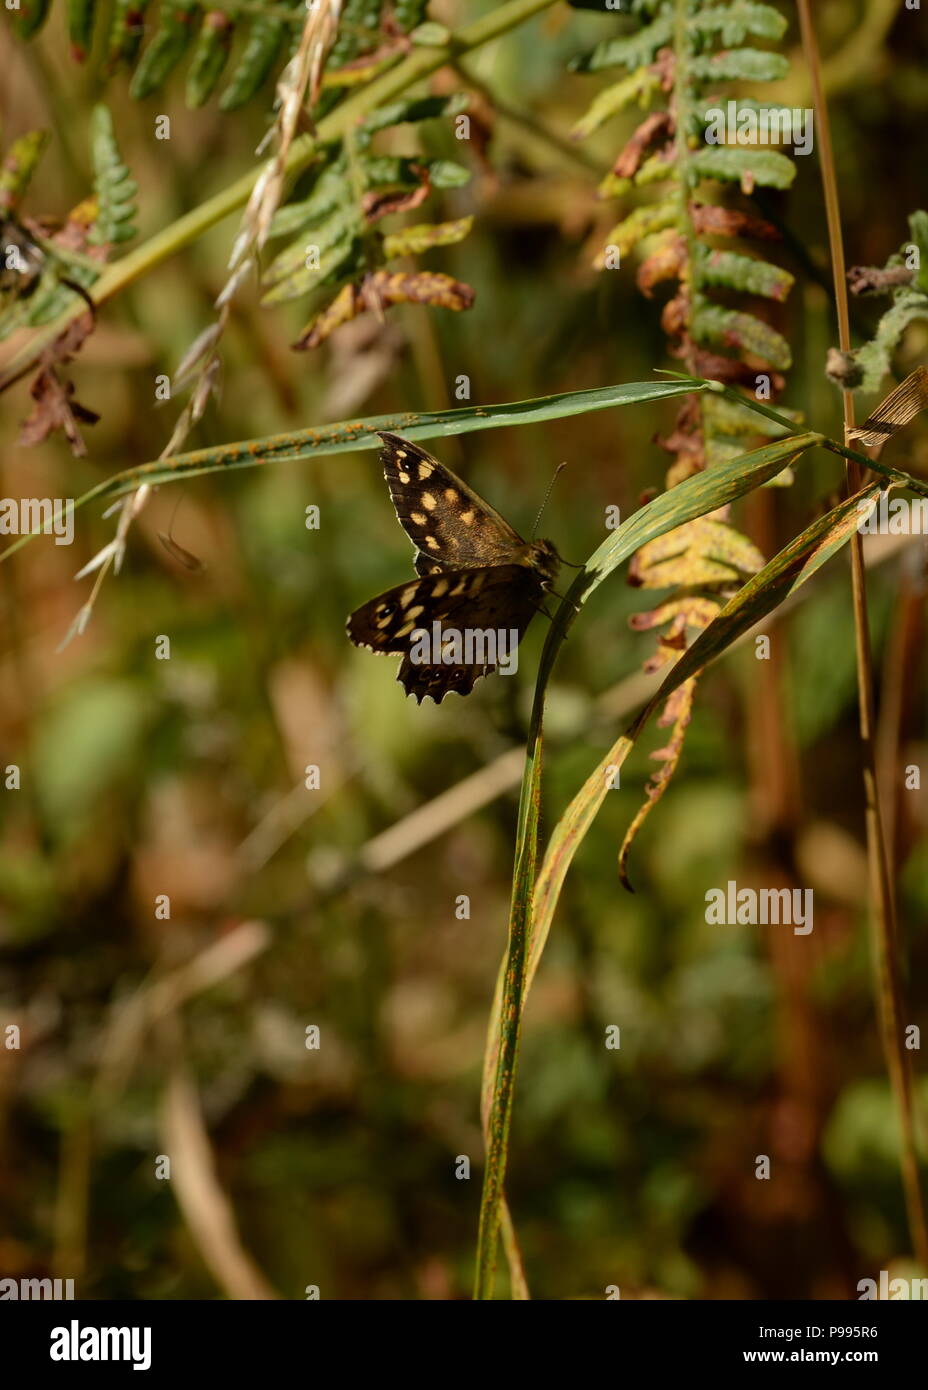 Speckled wood butterfly Stock Photo